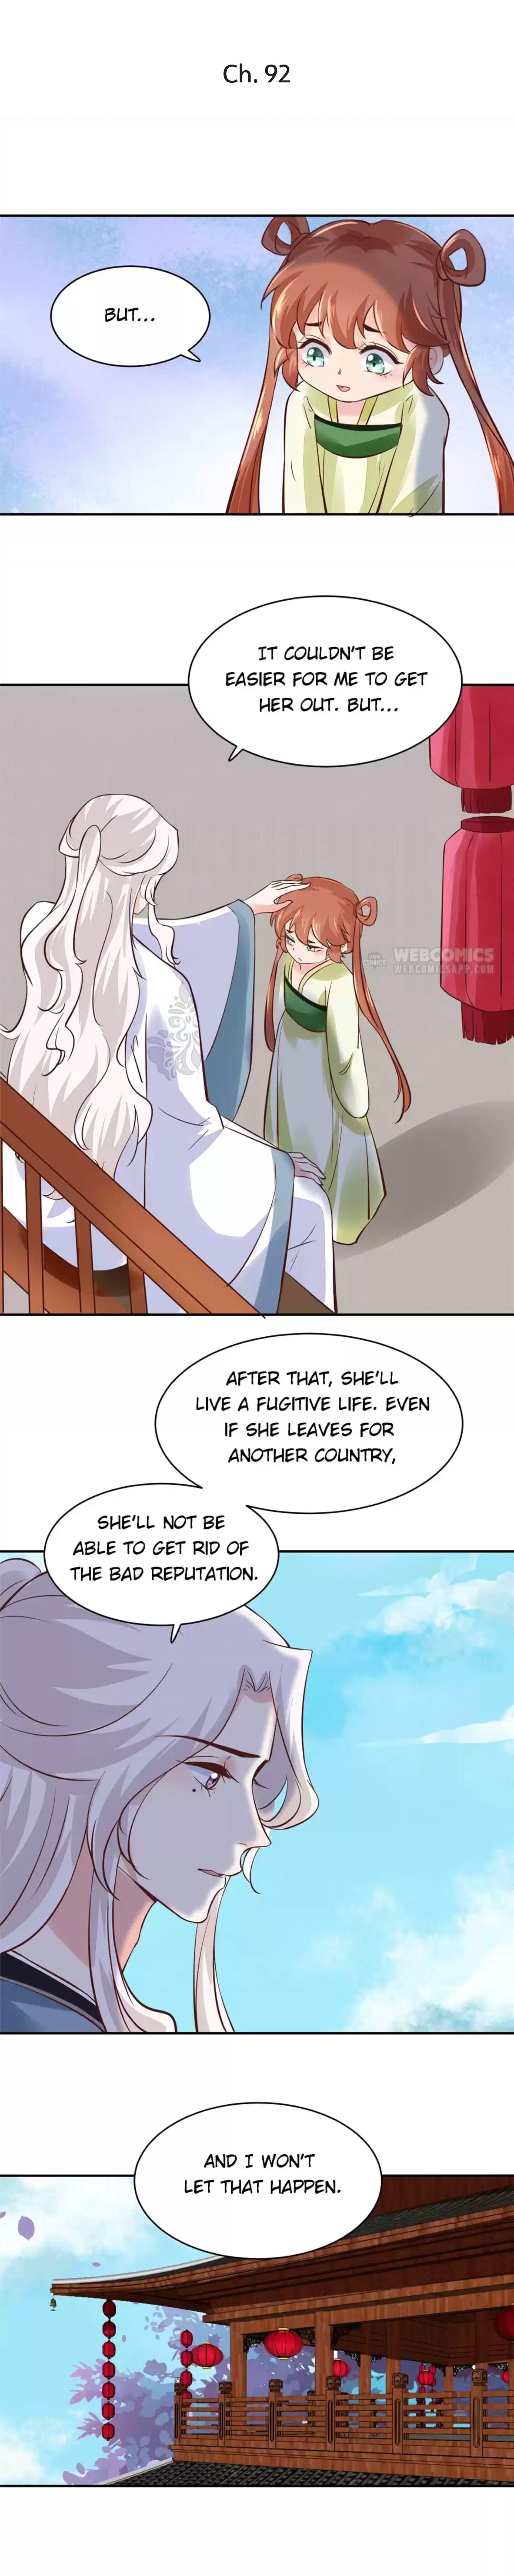 General And Her Medic Lover - Page 2